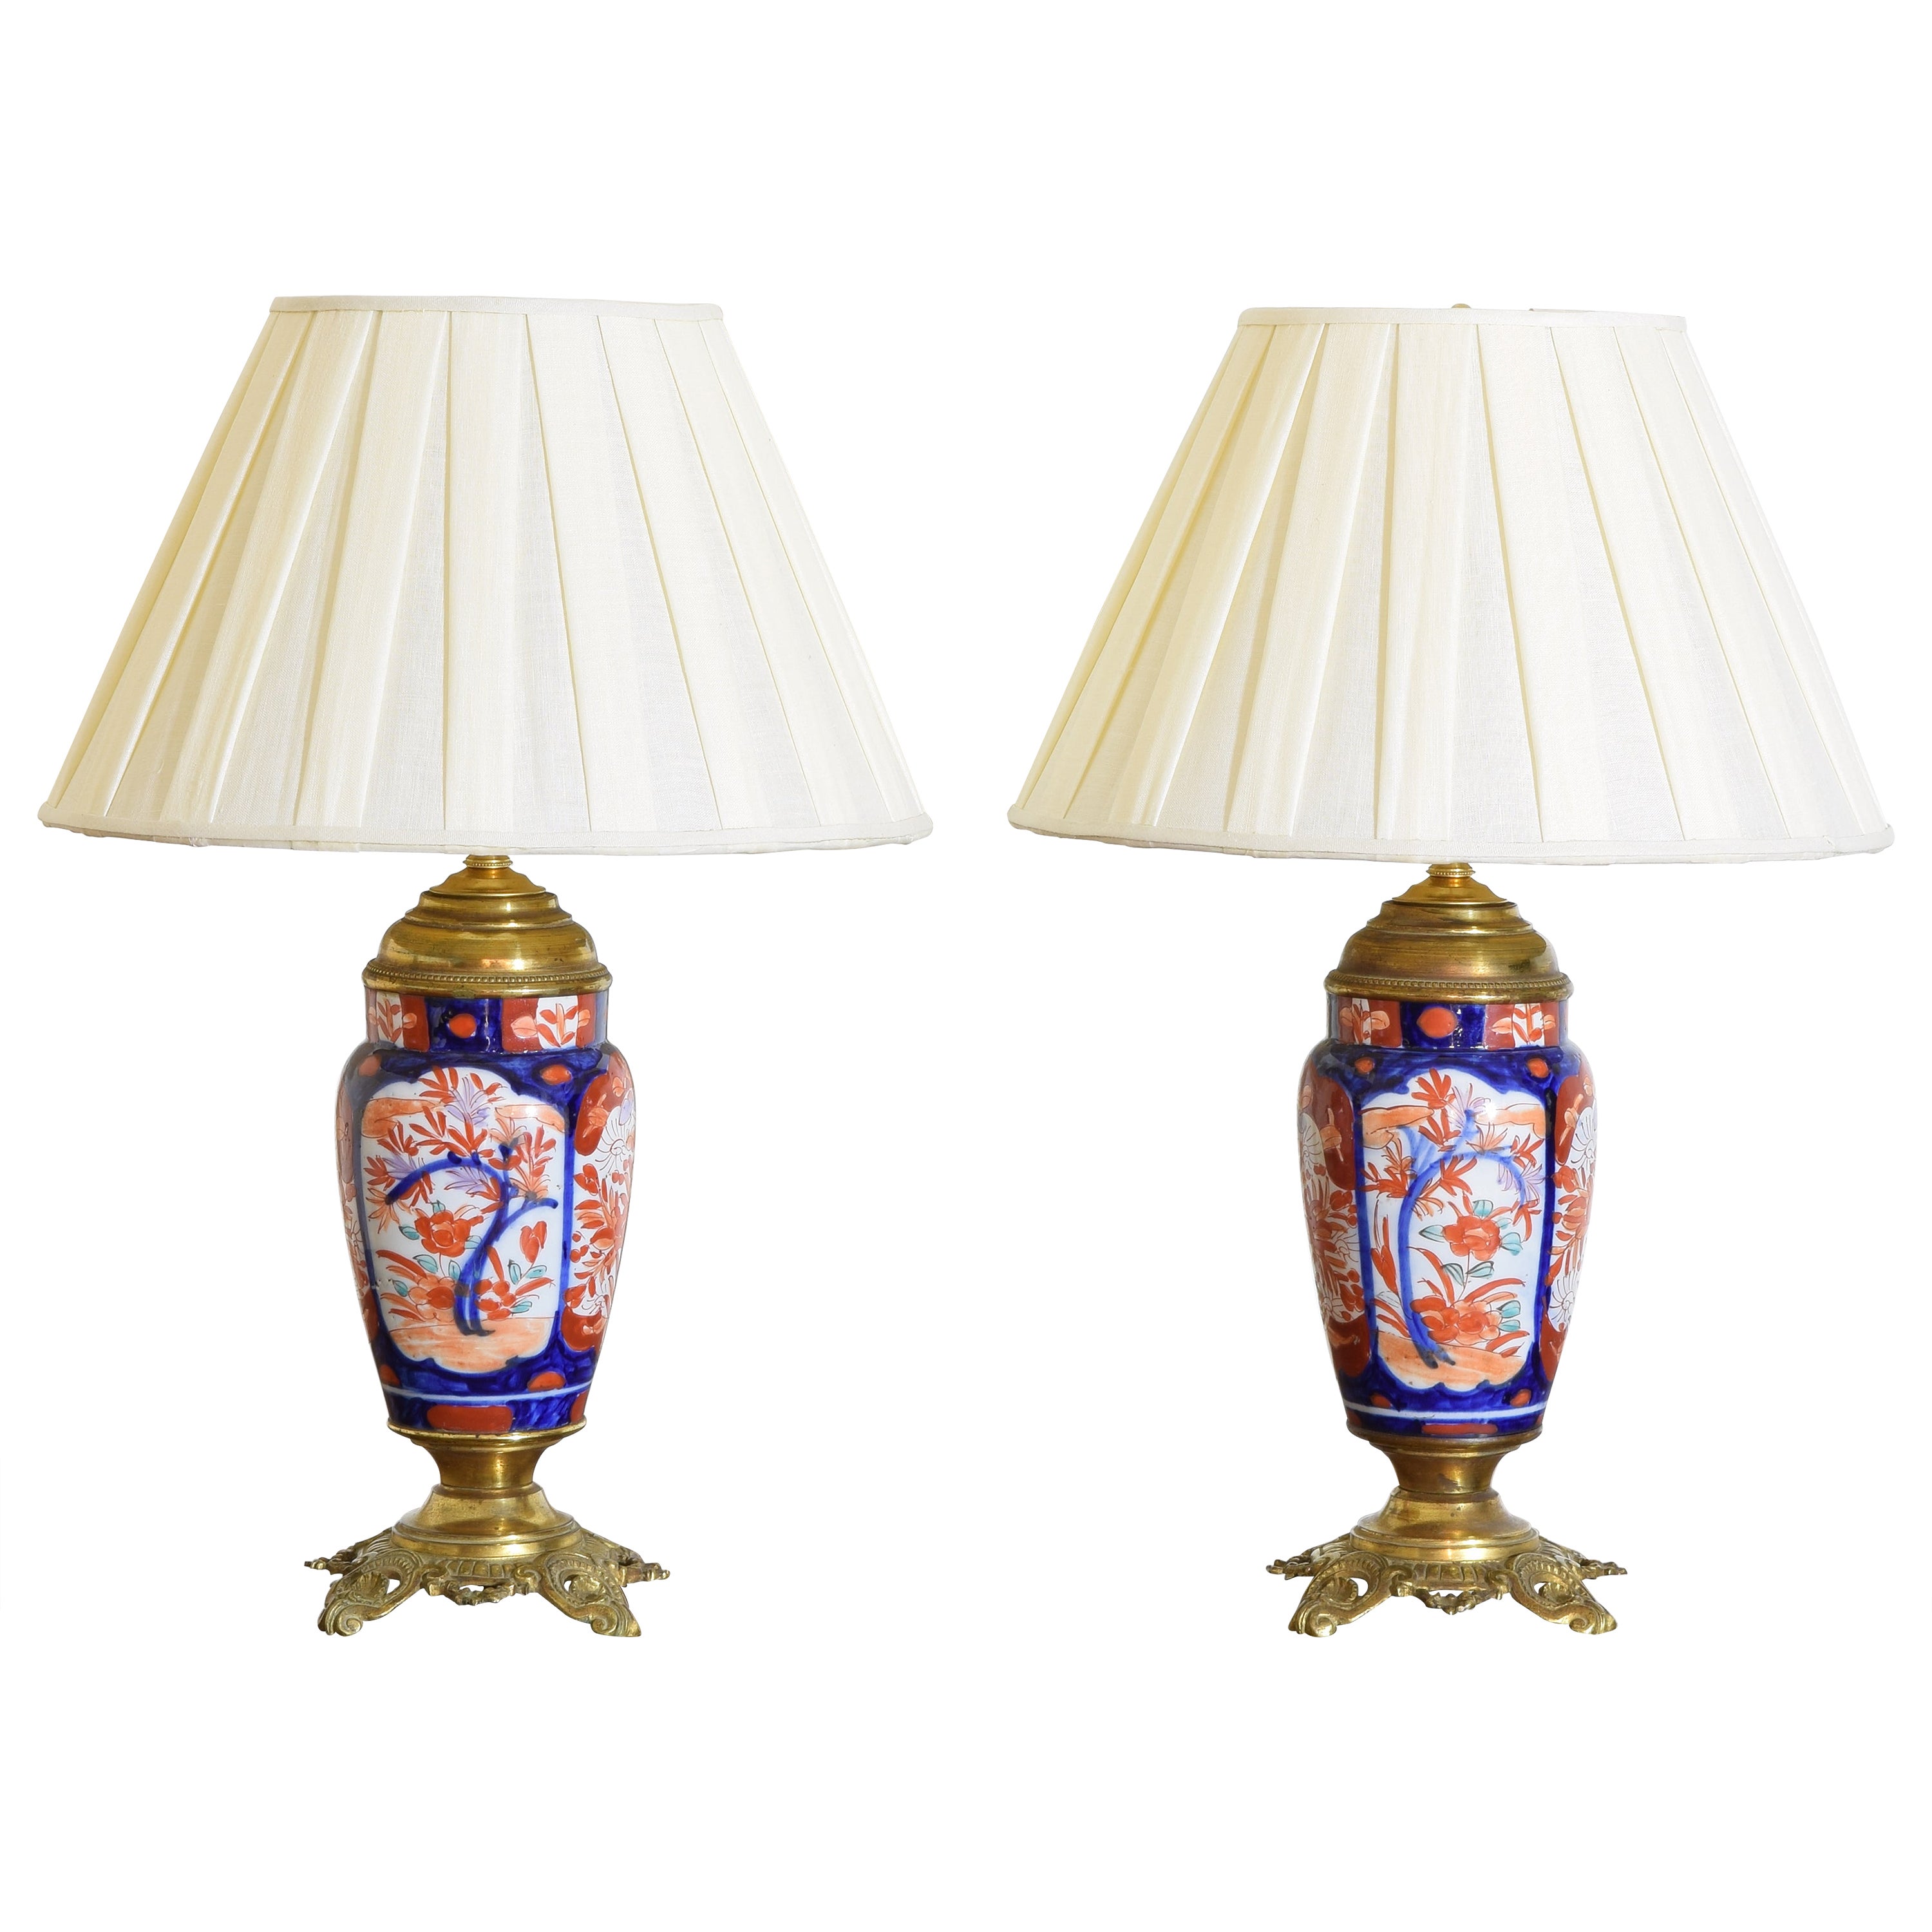 Pair of Japanese Imari Porcelain and Gilt Brass Table Lamps, early 20th C. For Sale